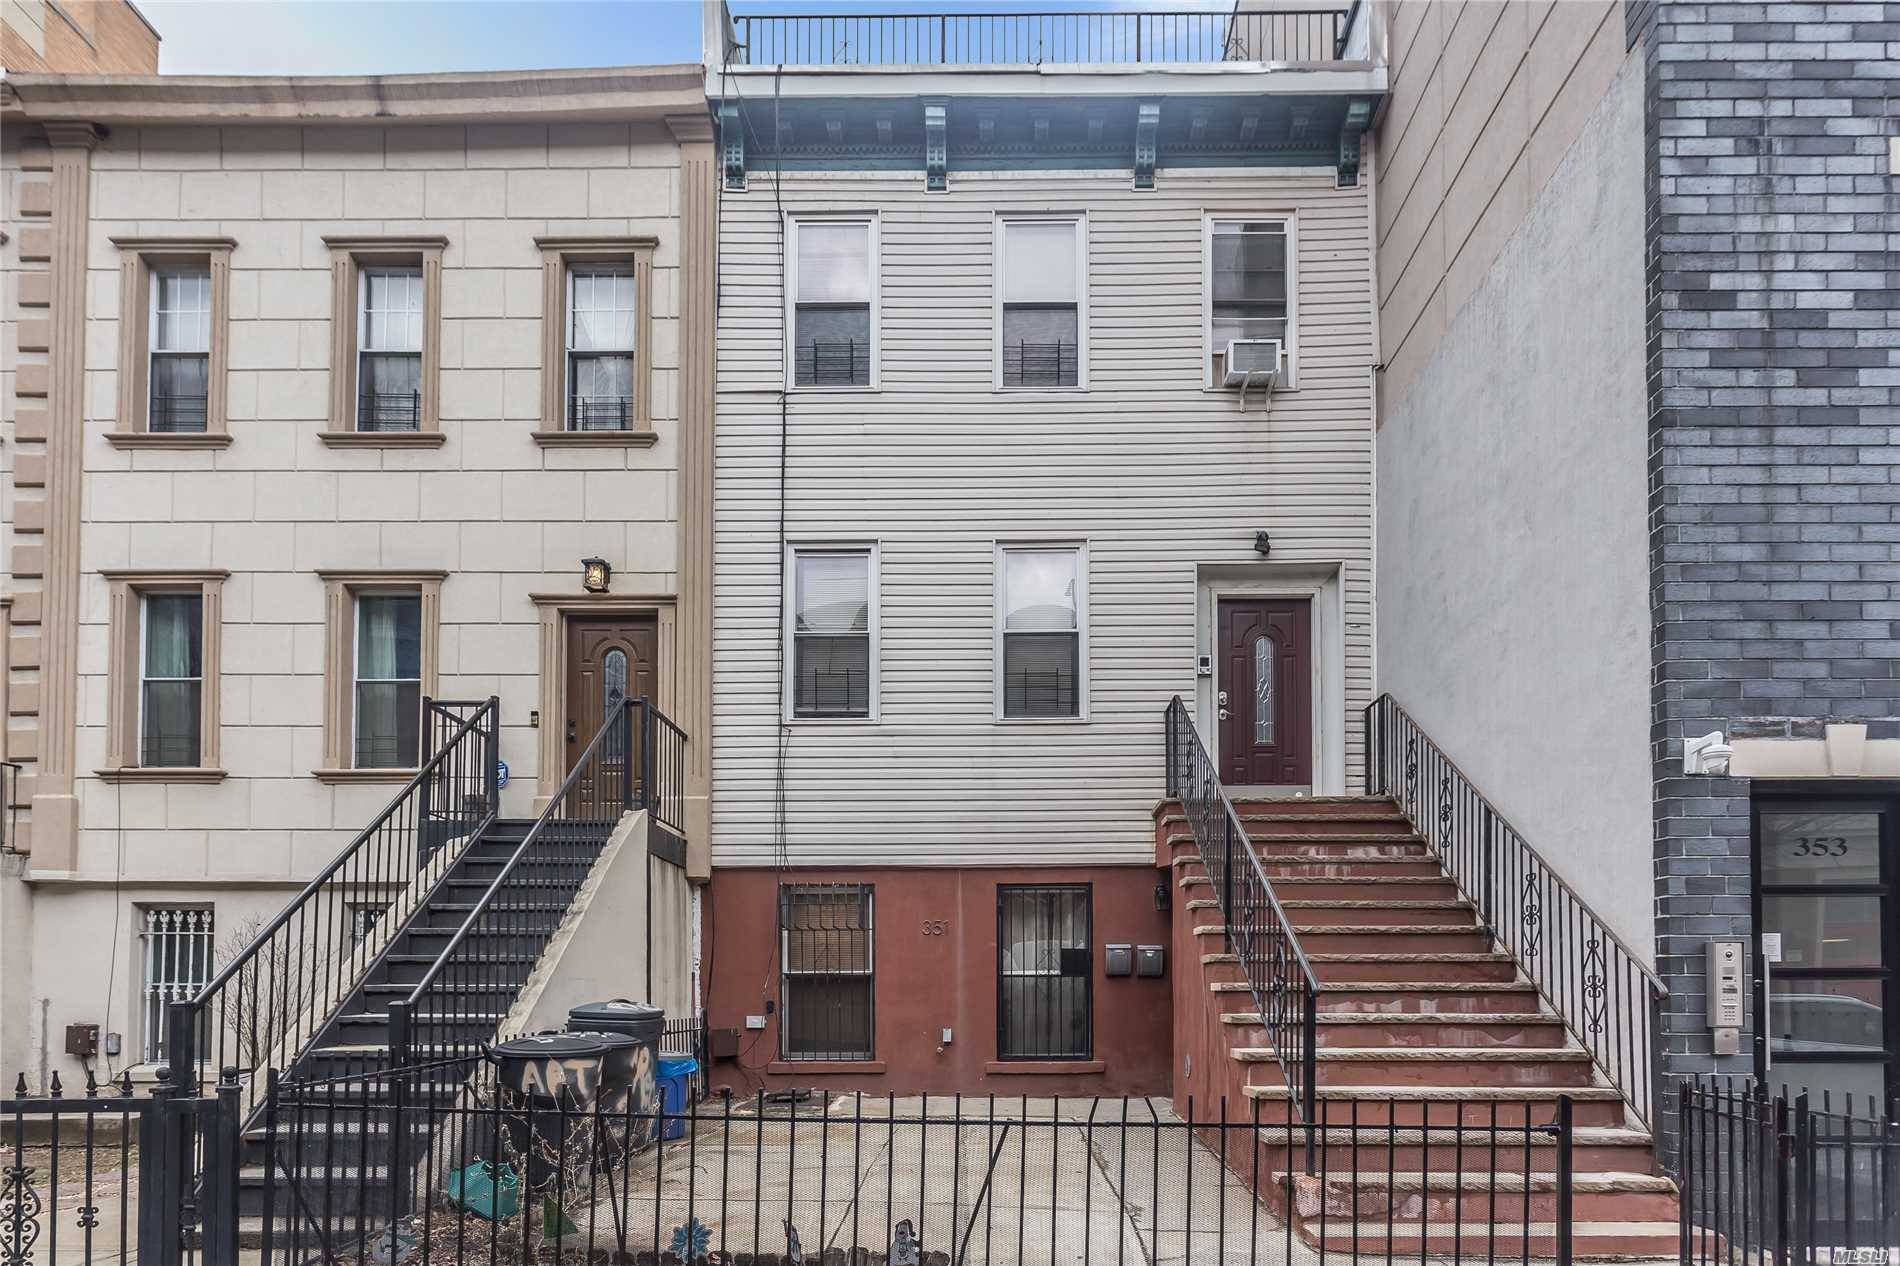 Beautiful legal two family townhouse located in Bedford Stuyvesant.